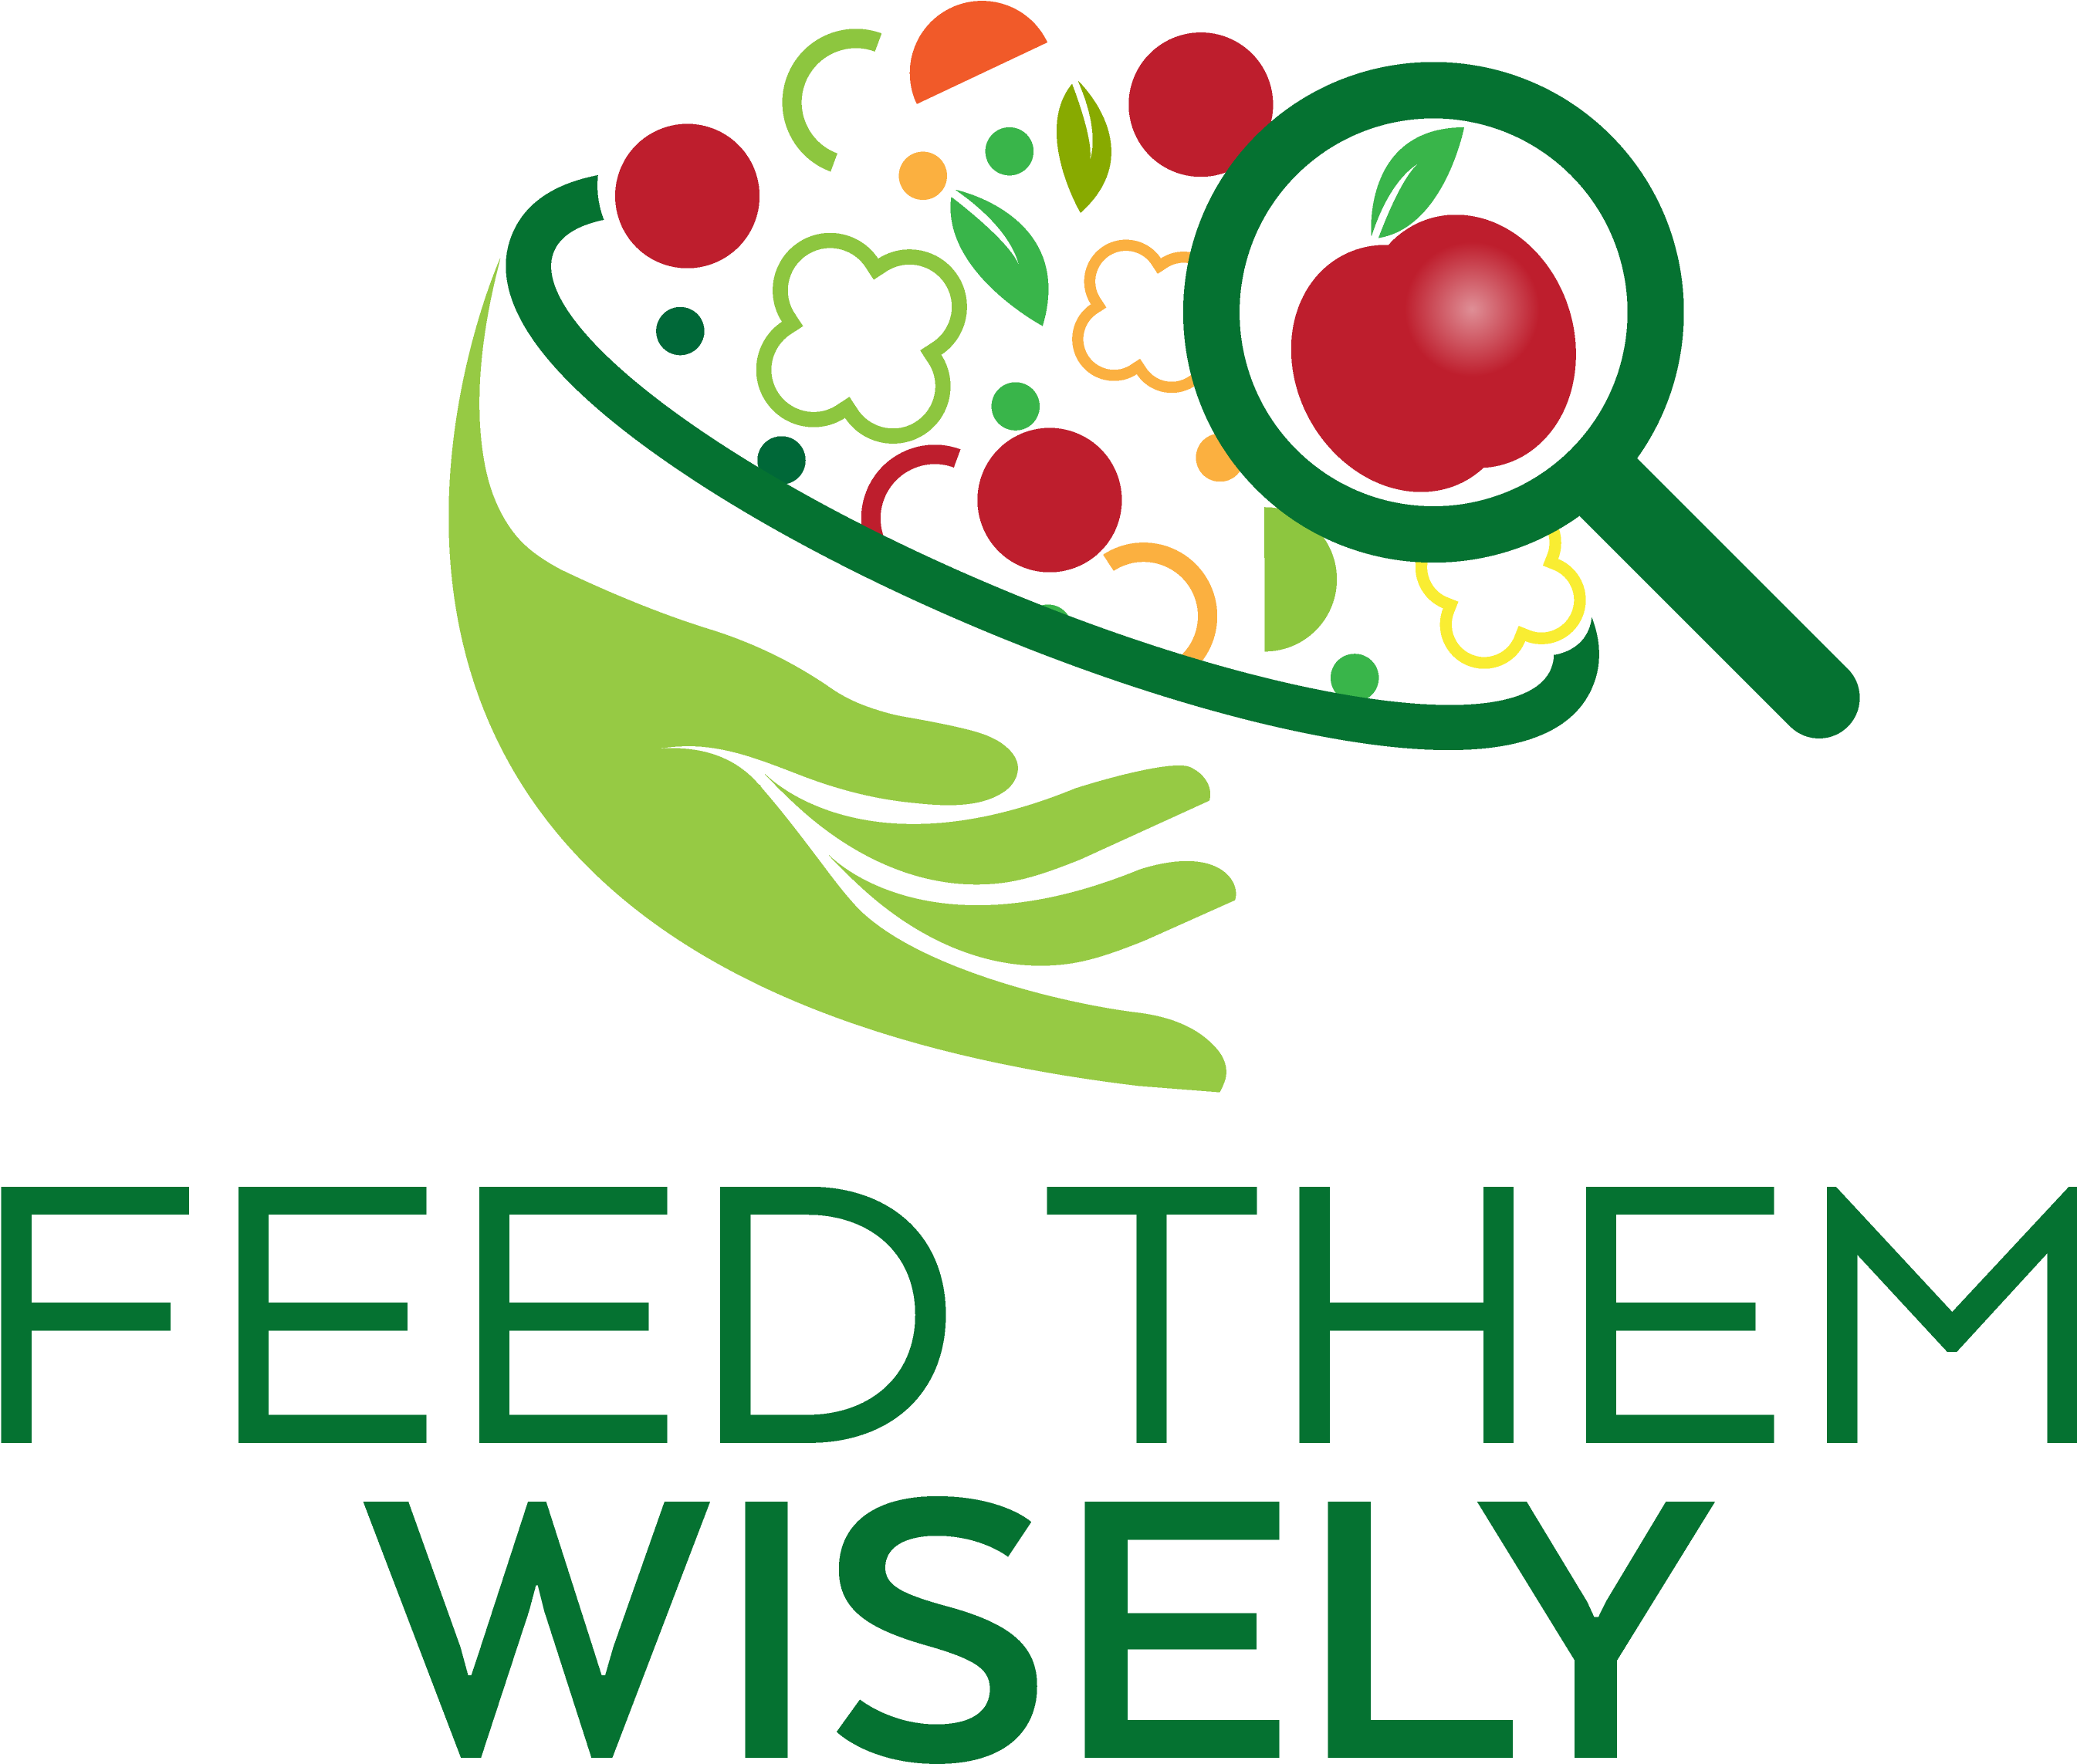 Feed Them Wisely - Feed Them Wisely (4724x2492)